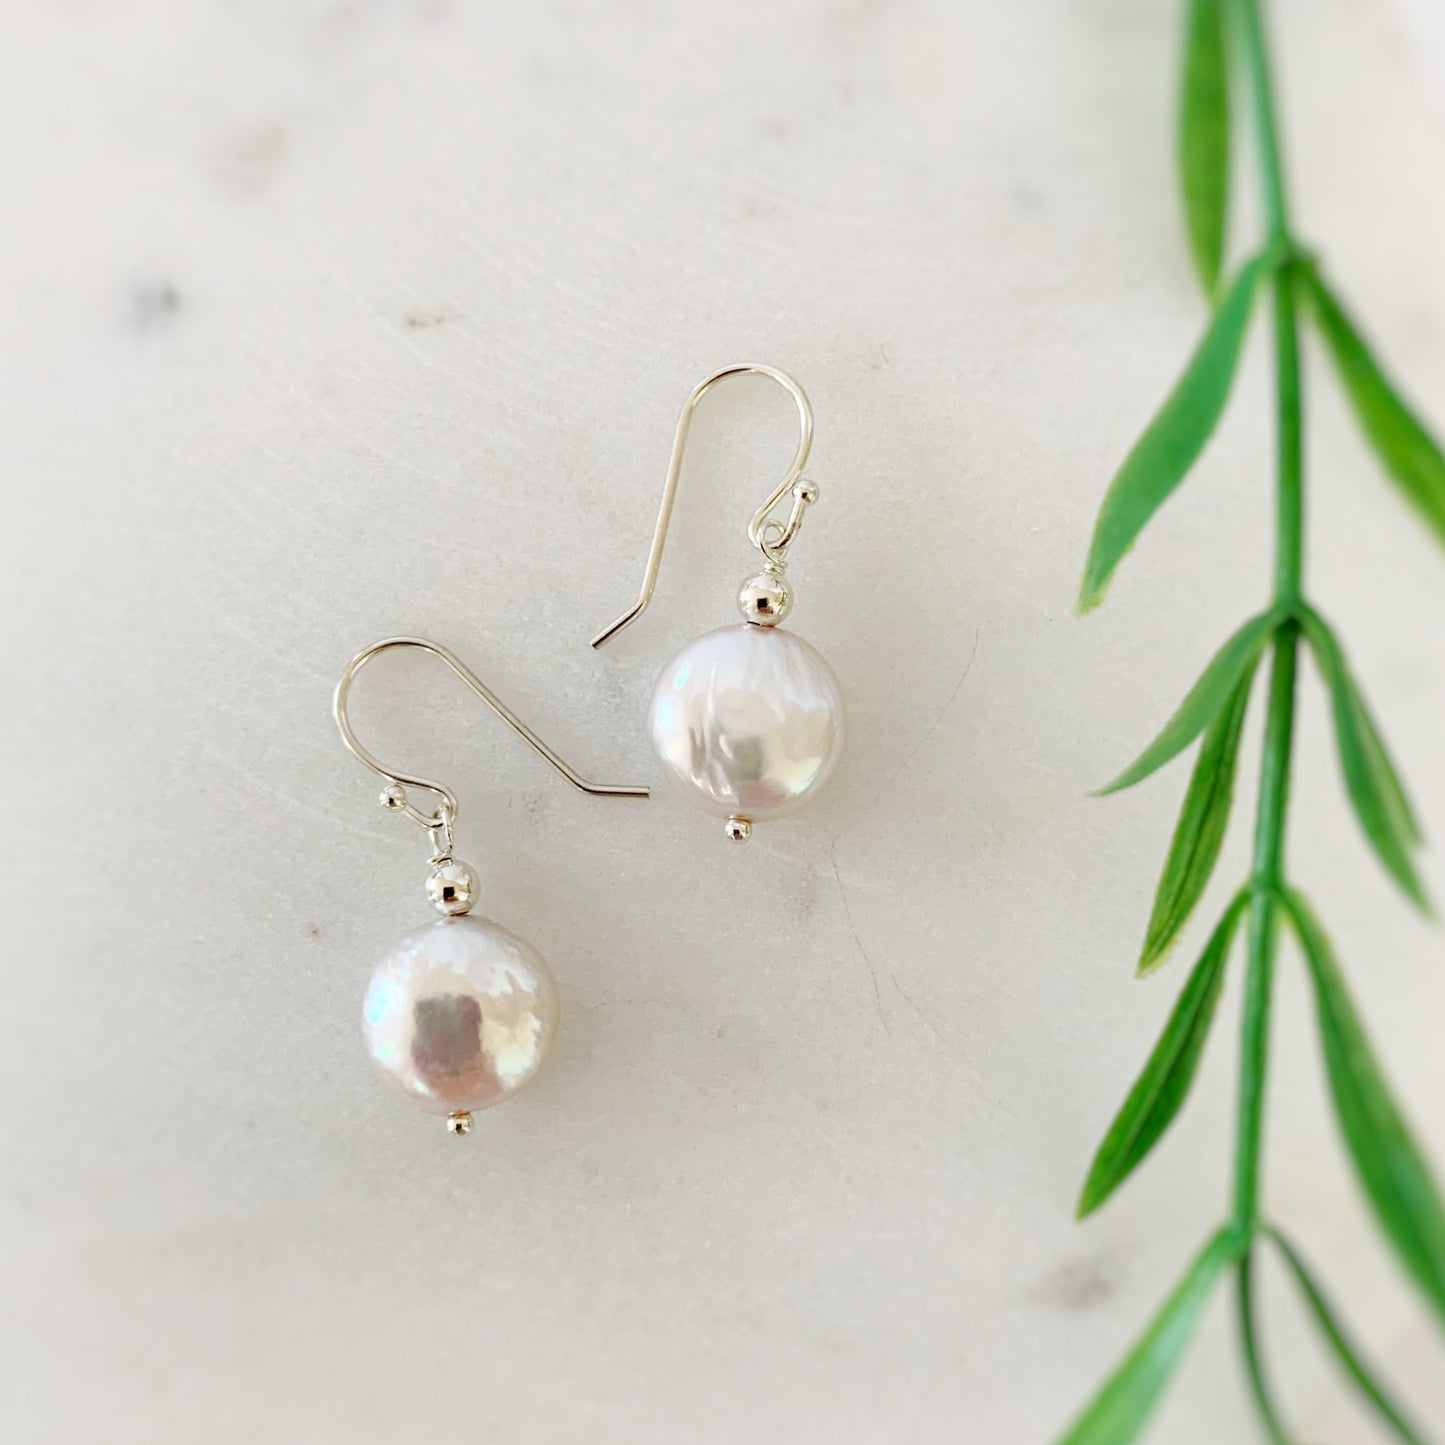 Newport earrings in sterling. This pair of earrings is created from sterling silver beads and earring findings with iridescent freshwater coin pearls. This pair is photographed on a white background with blurred greenery along the right side of the photo